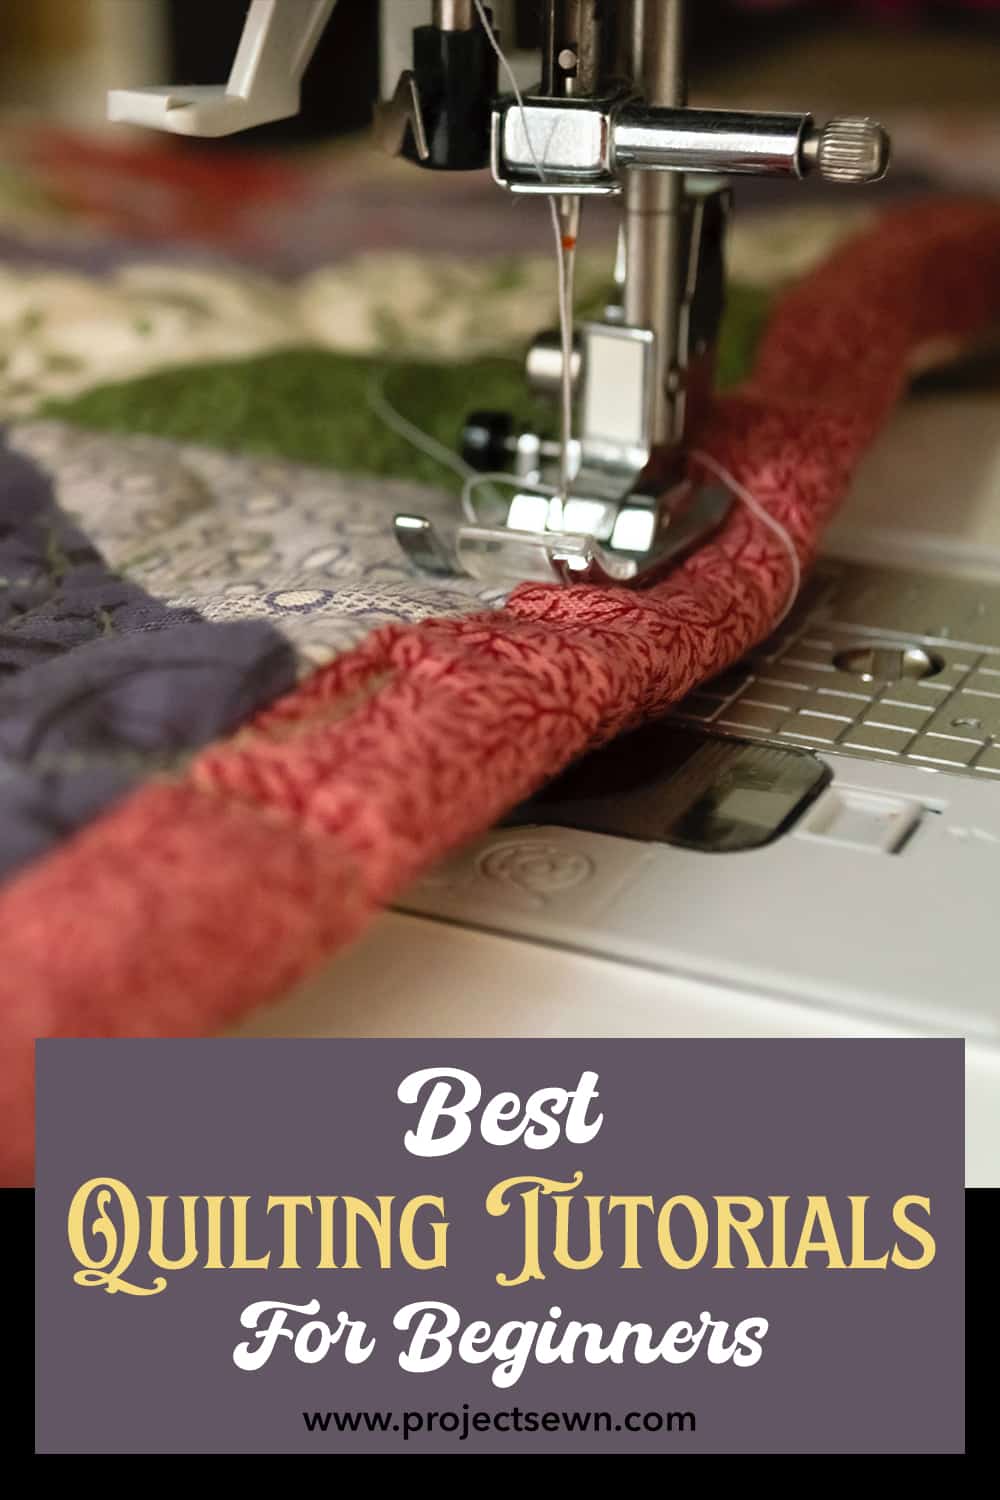 Quilting Tutorials for Beginners